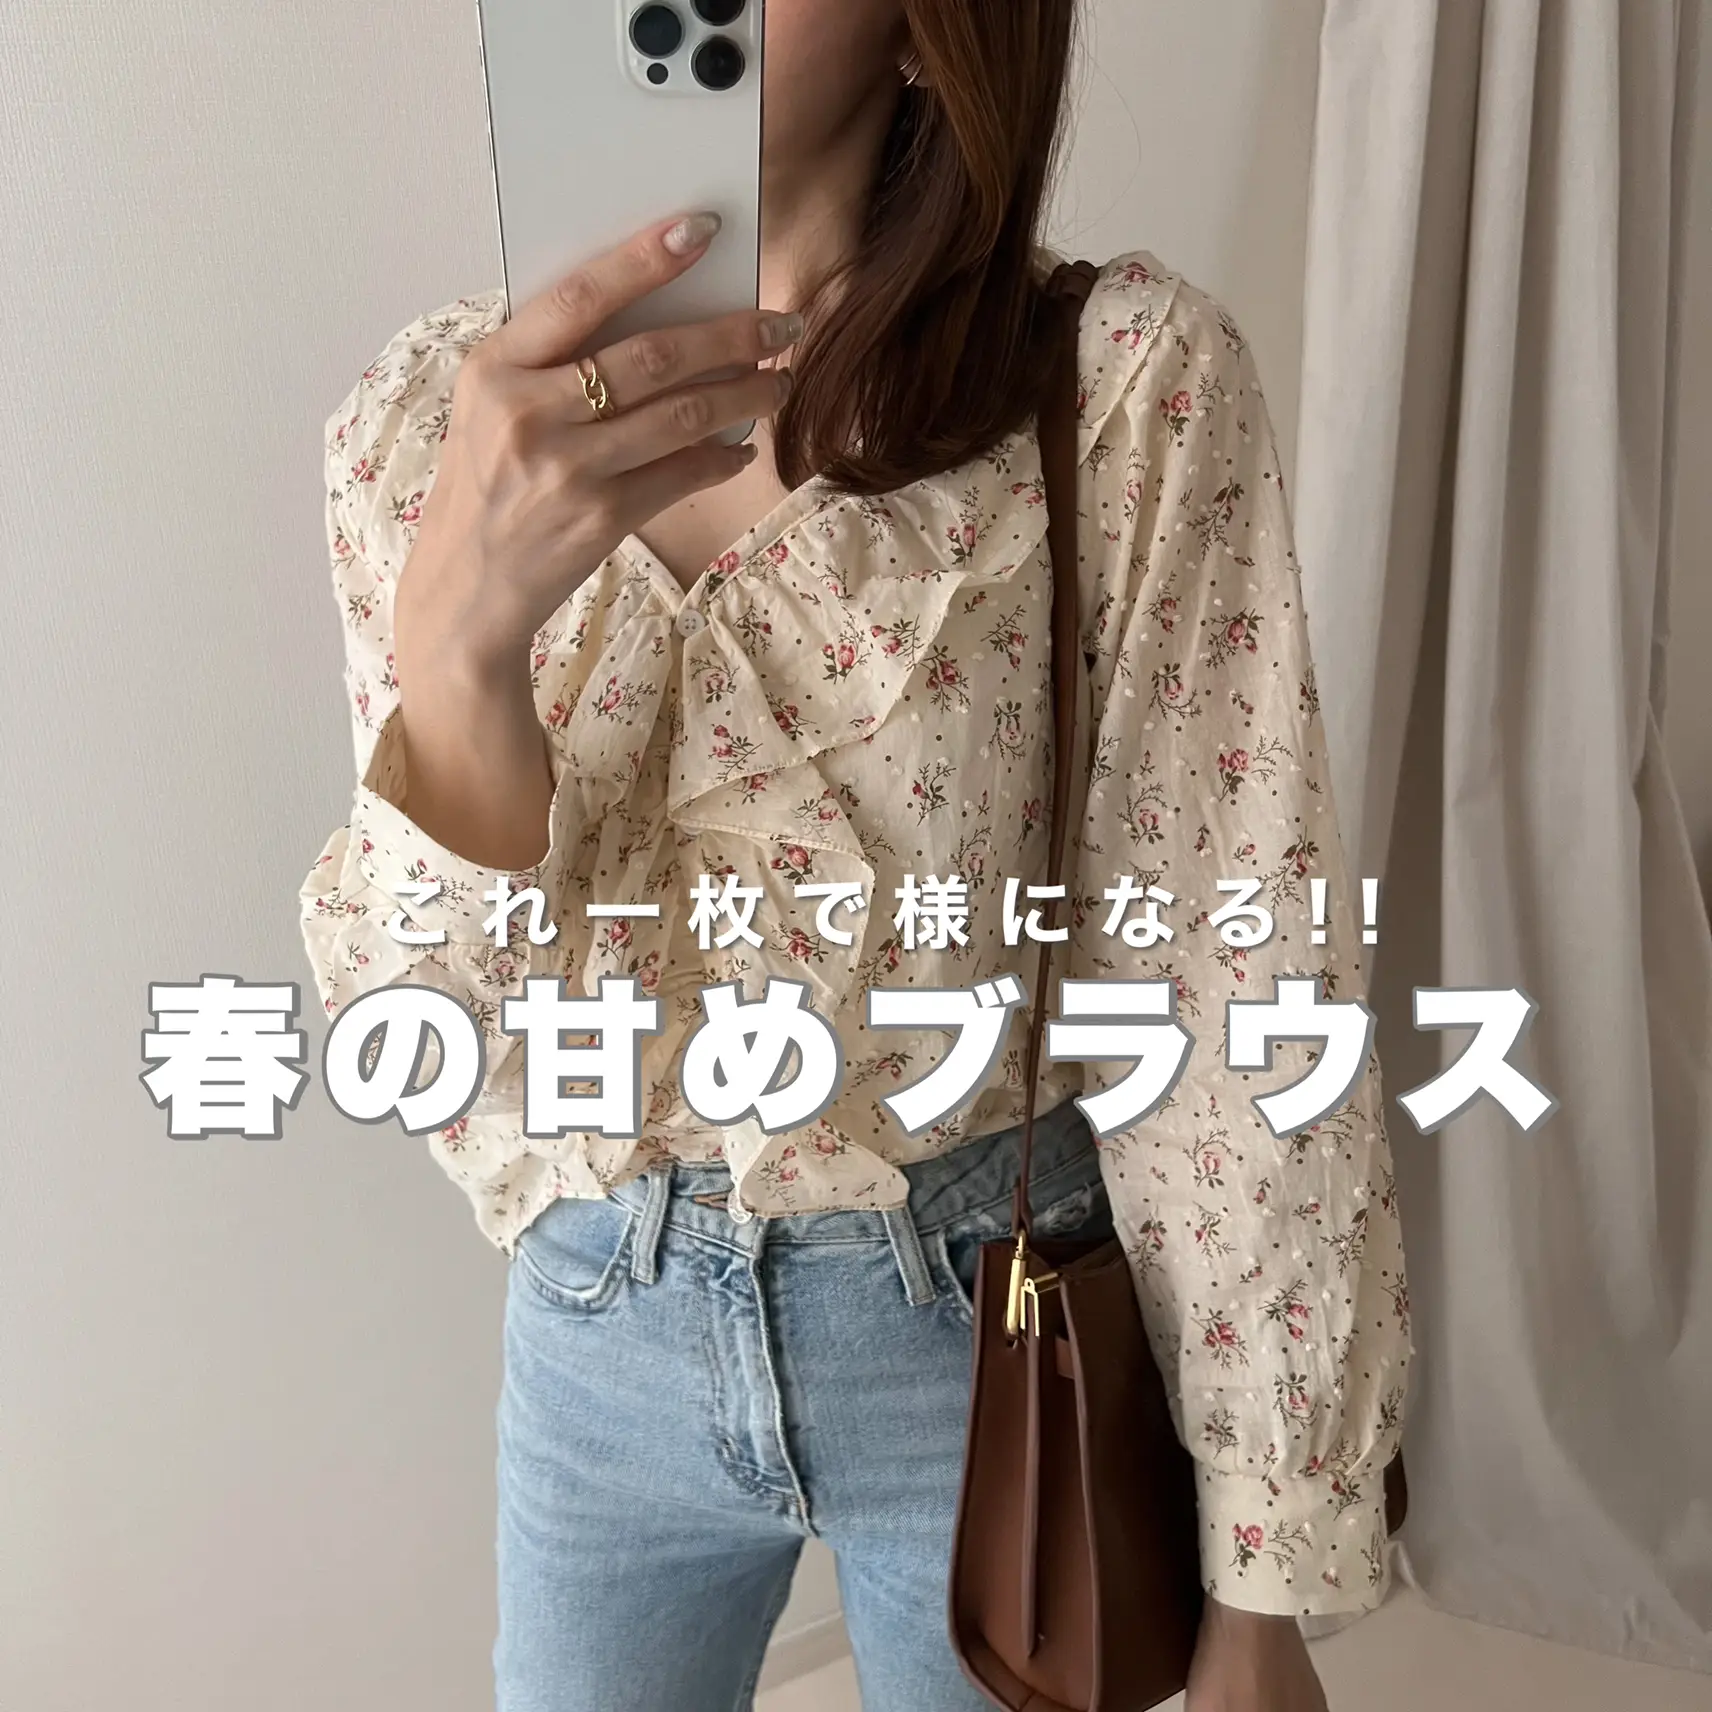 Spring blouse with one piece | Gallery posted by あゆ🕊️プチプラ